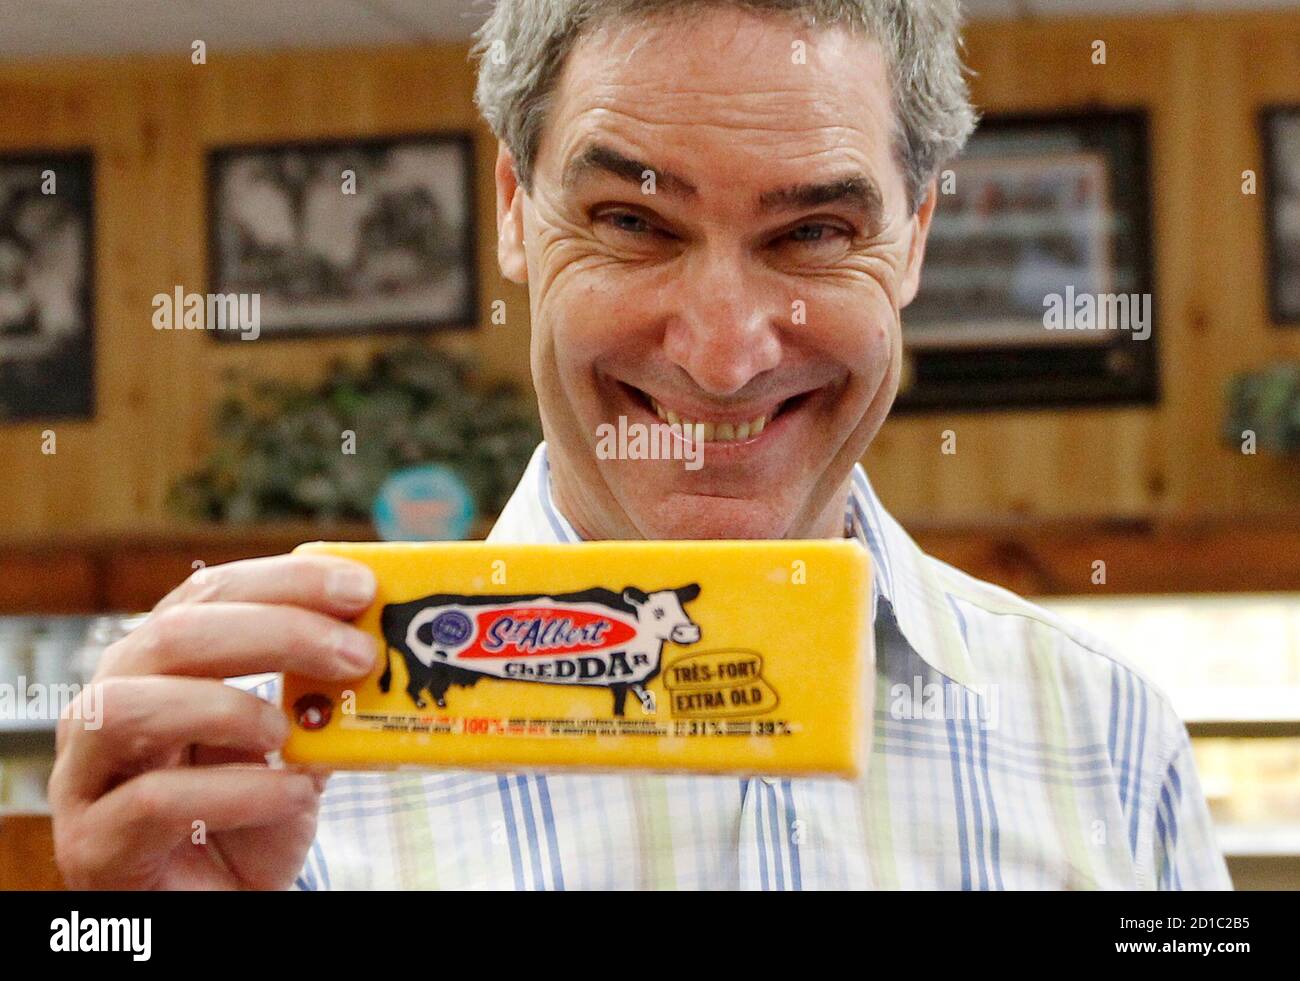 Liberal leader Michael Ignatieff holds up cheese for photographers while visiting the St-Albert Cheese Co-operative in St-Albert, Ontario July 13, 2010.       REUTERS/Chris Wattie       (CANADA - Tags: POLITICS) Stock Photo